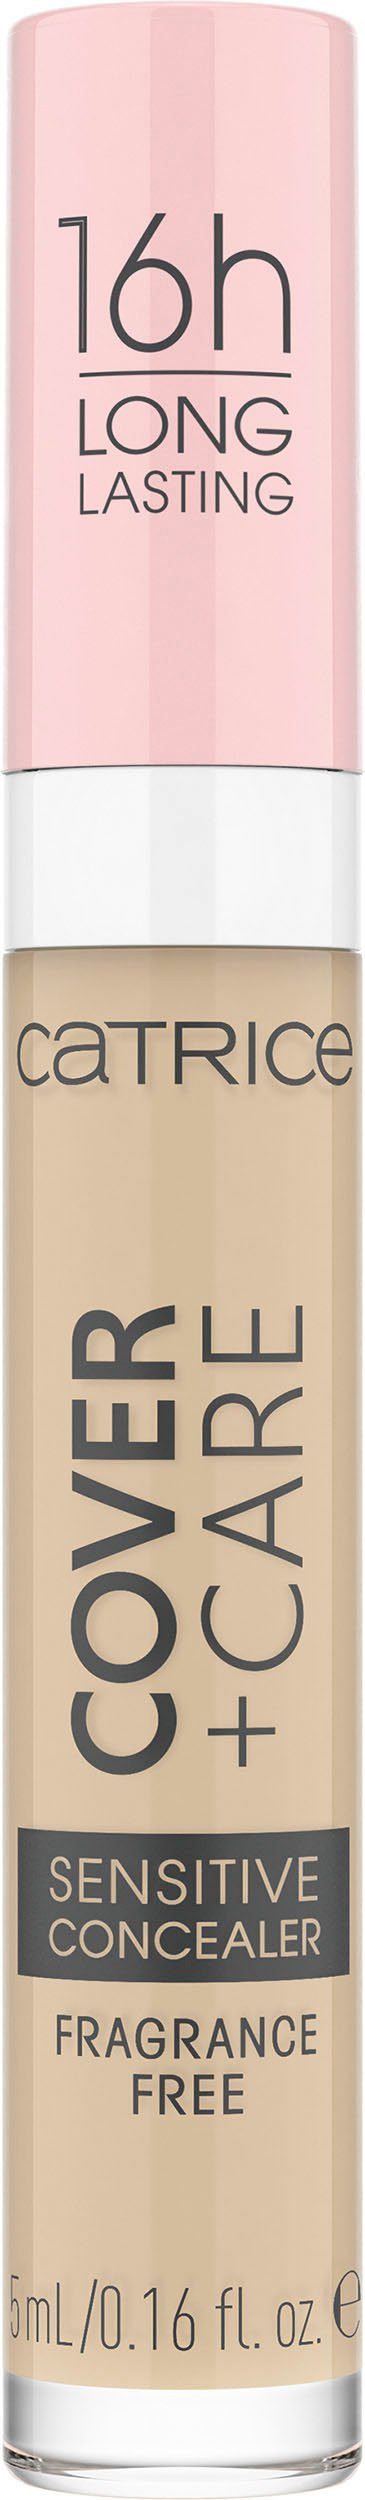 Catrice Concealer Concealer, 3-tlg. Catrice Care + Cover 002N nude Sensitive